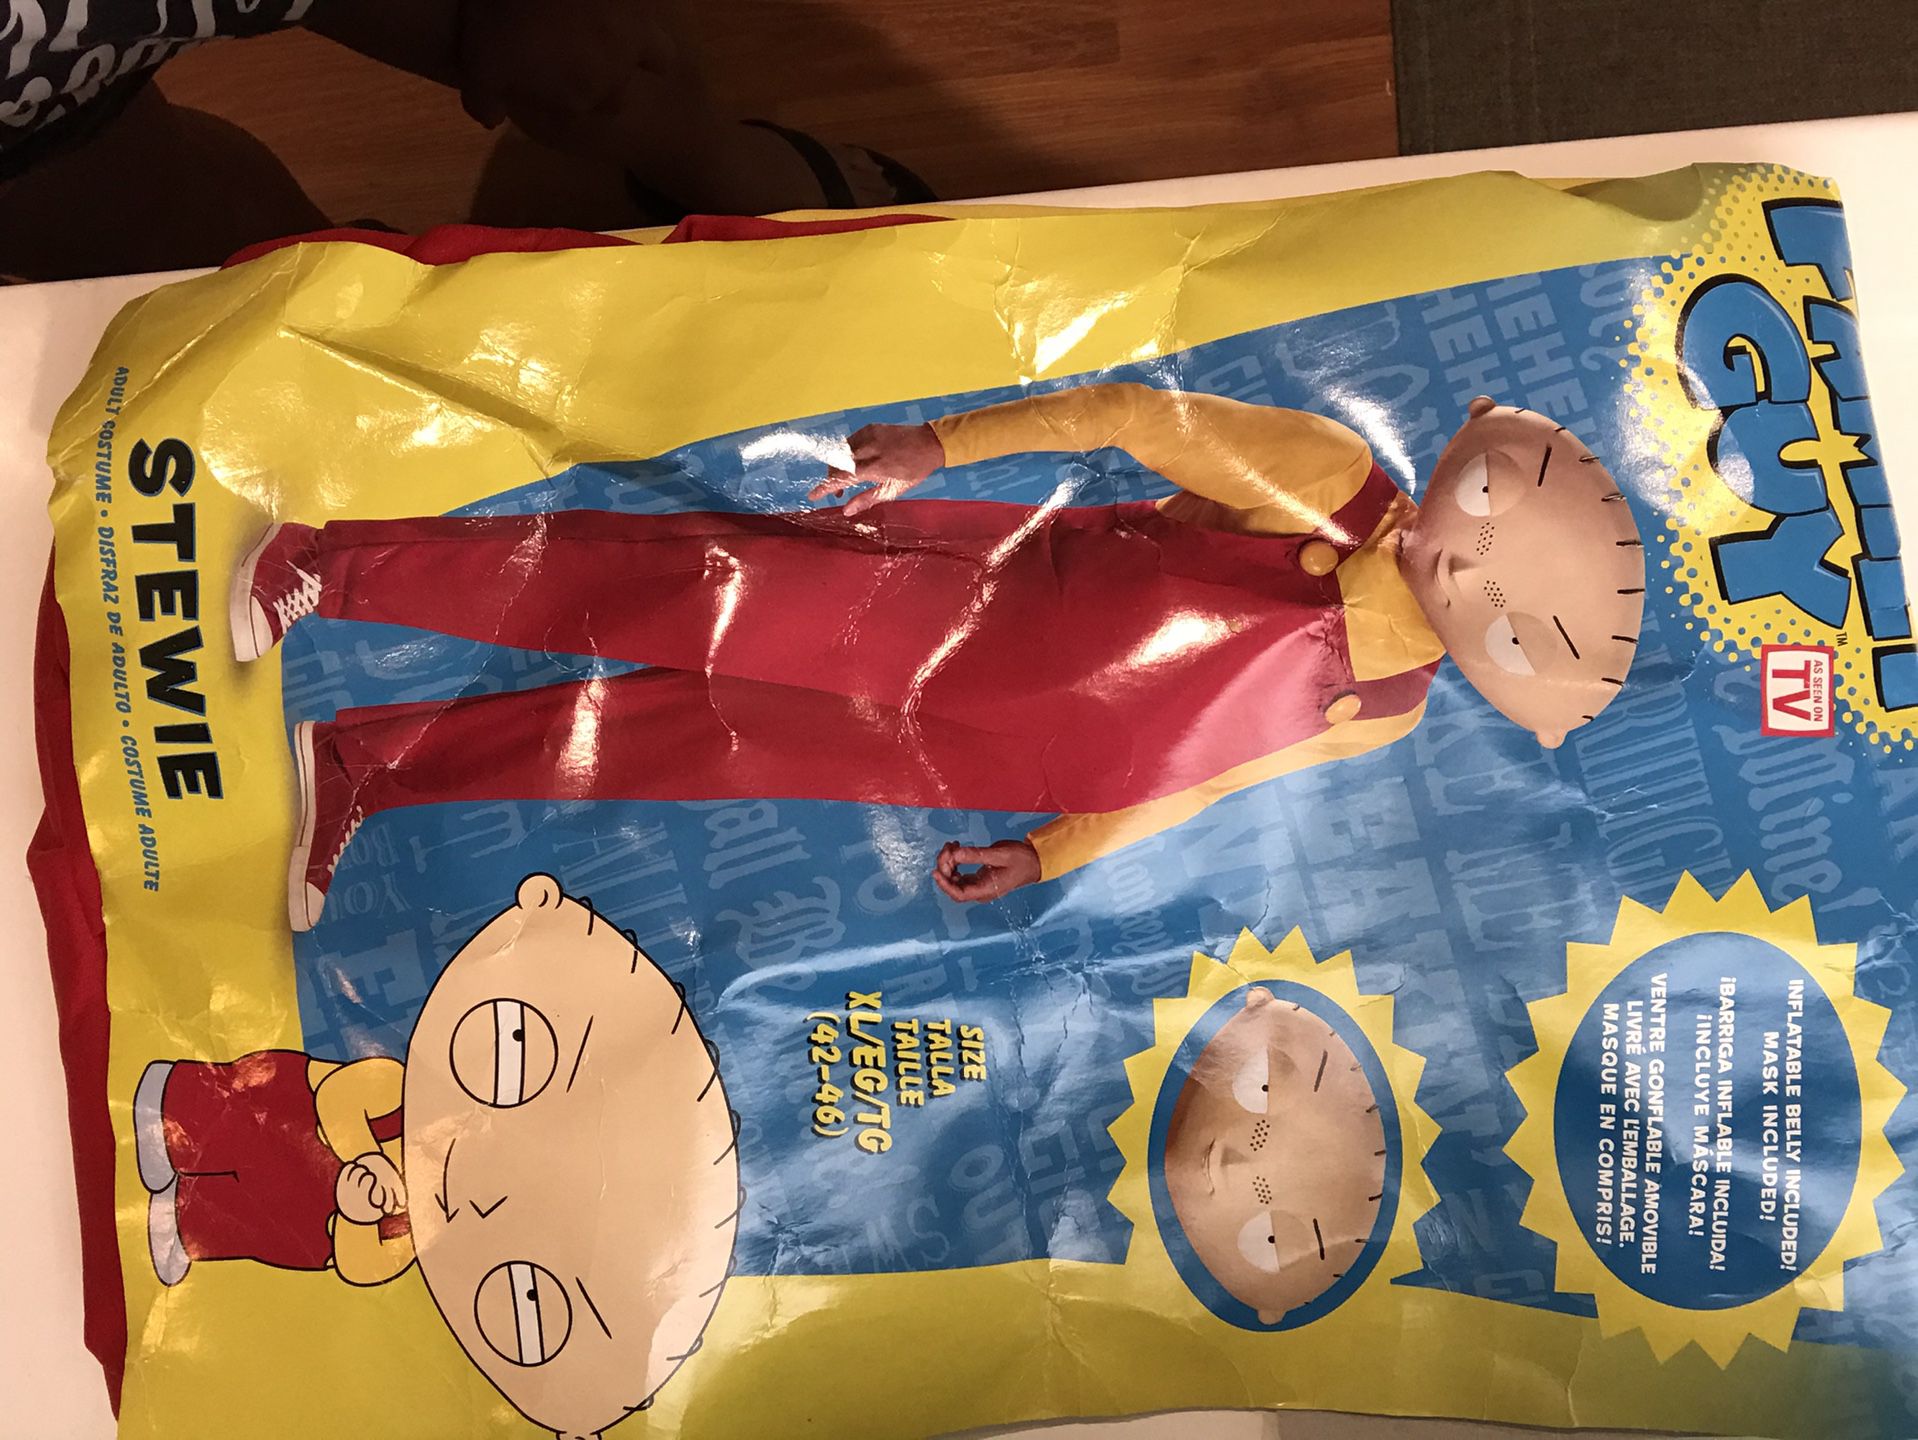 Family Guy “Stewie” Halloween Costumes